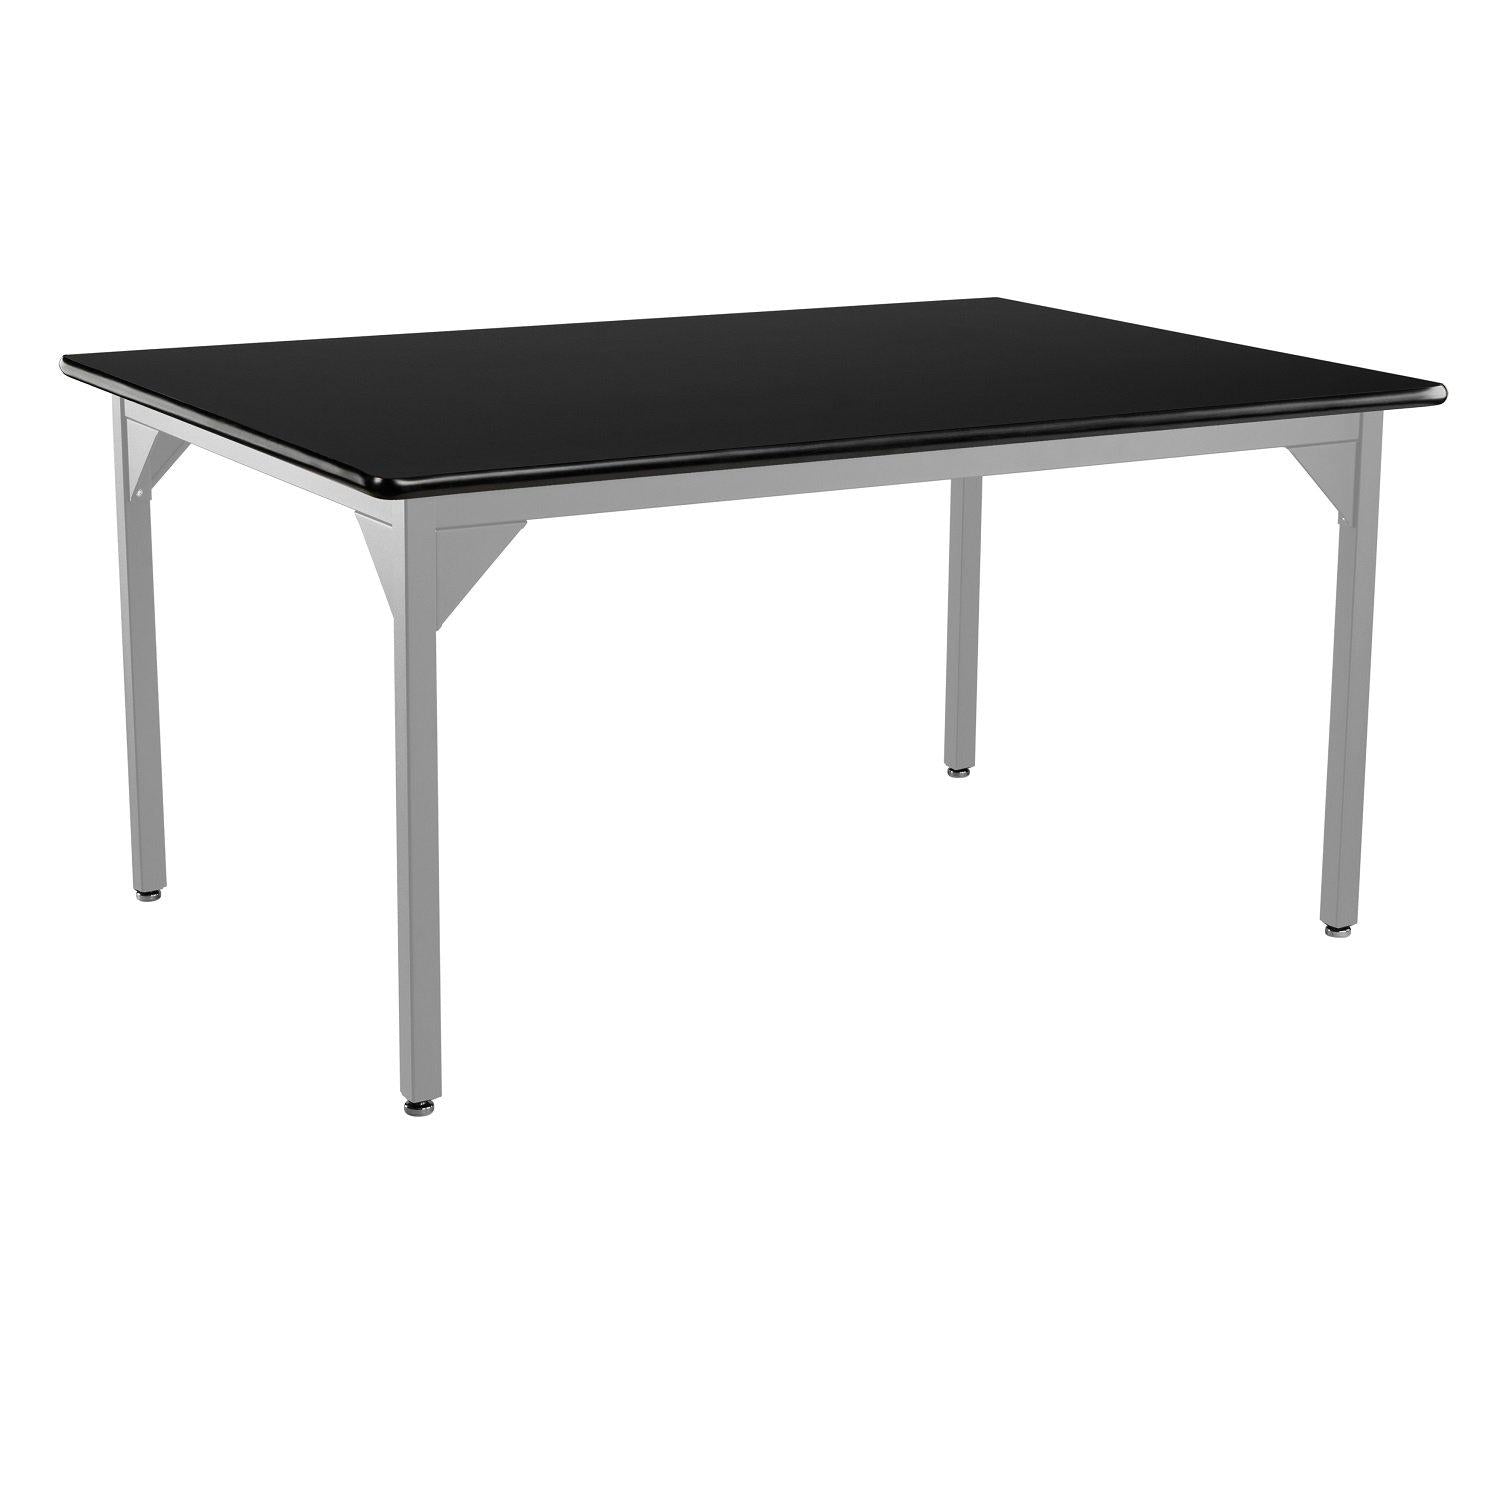 Heavy-Duty Fixed Height Utility Table, Soft Grey Frame, 48" x 60", High-Pressure Laminate Top with T-Mold Edge